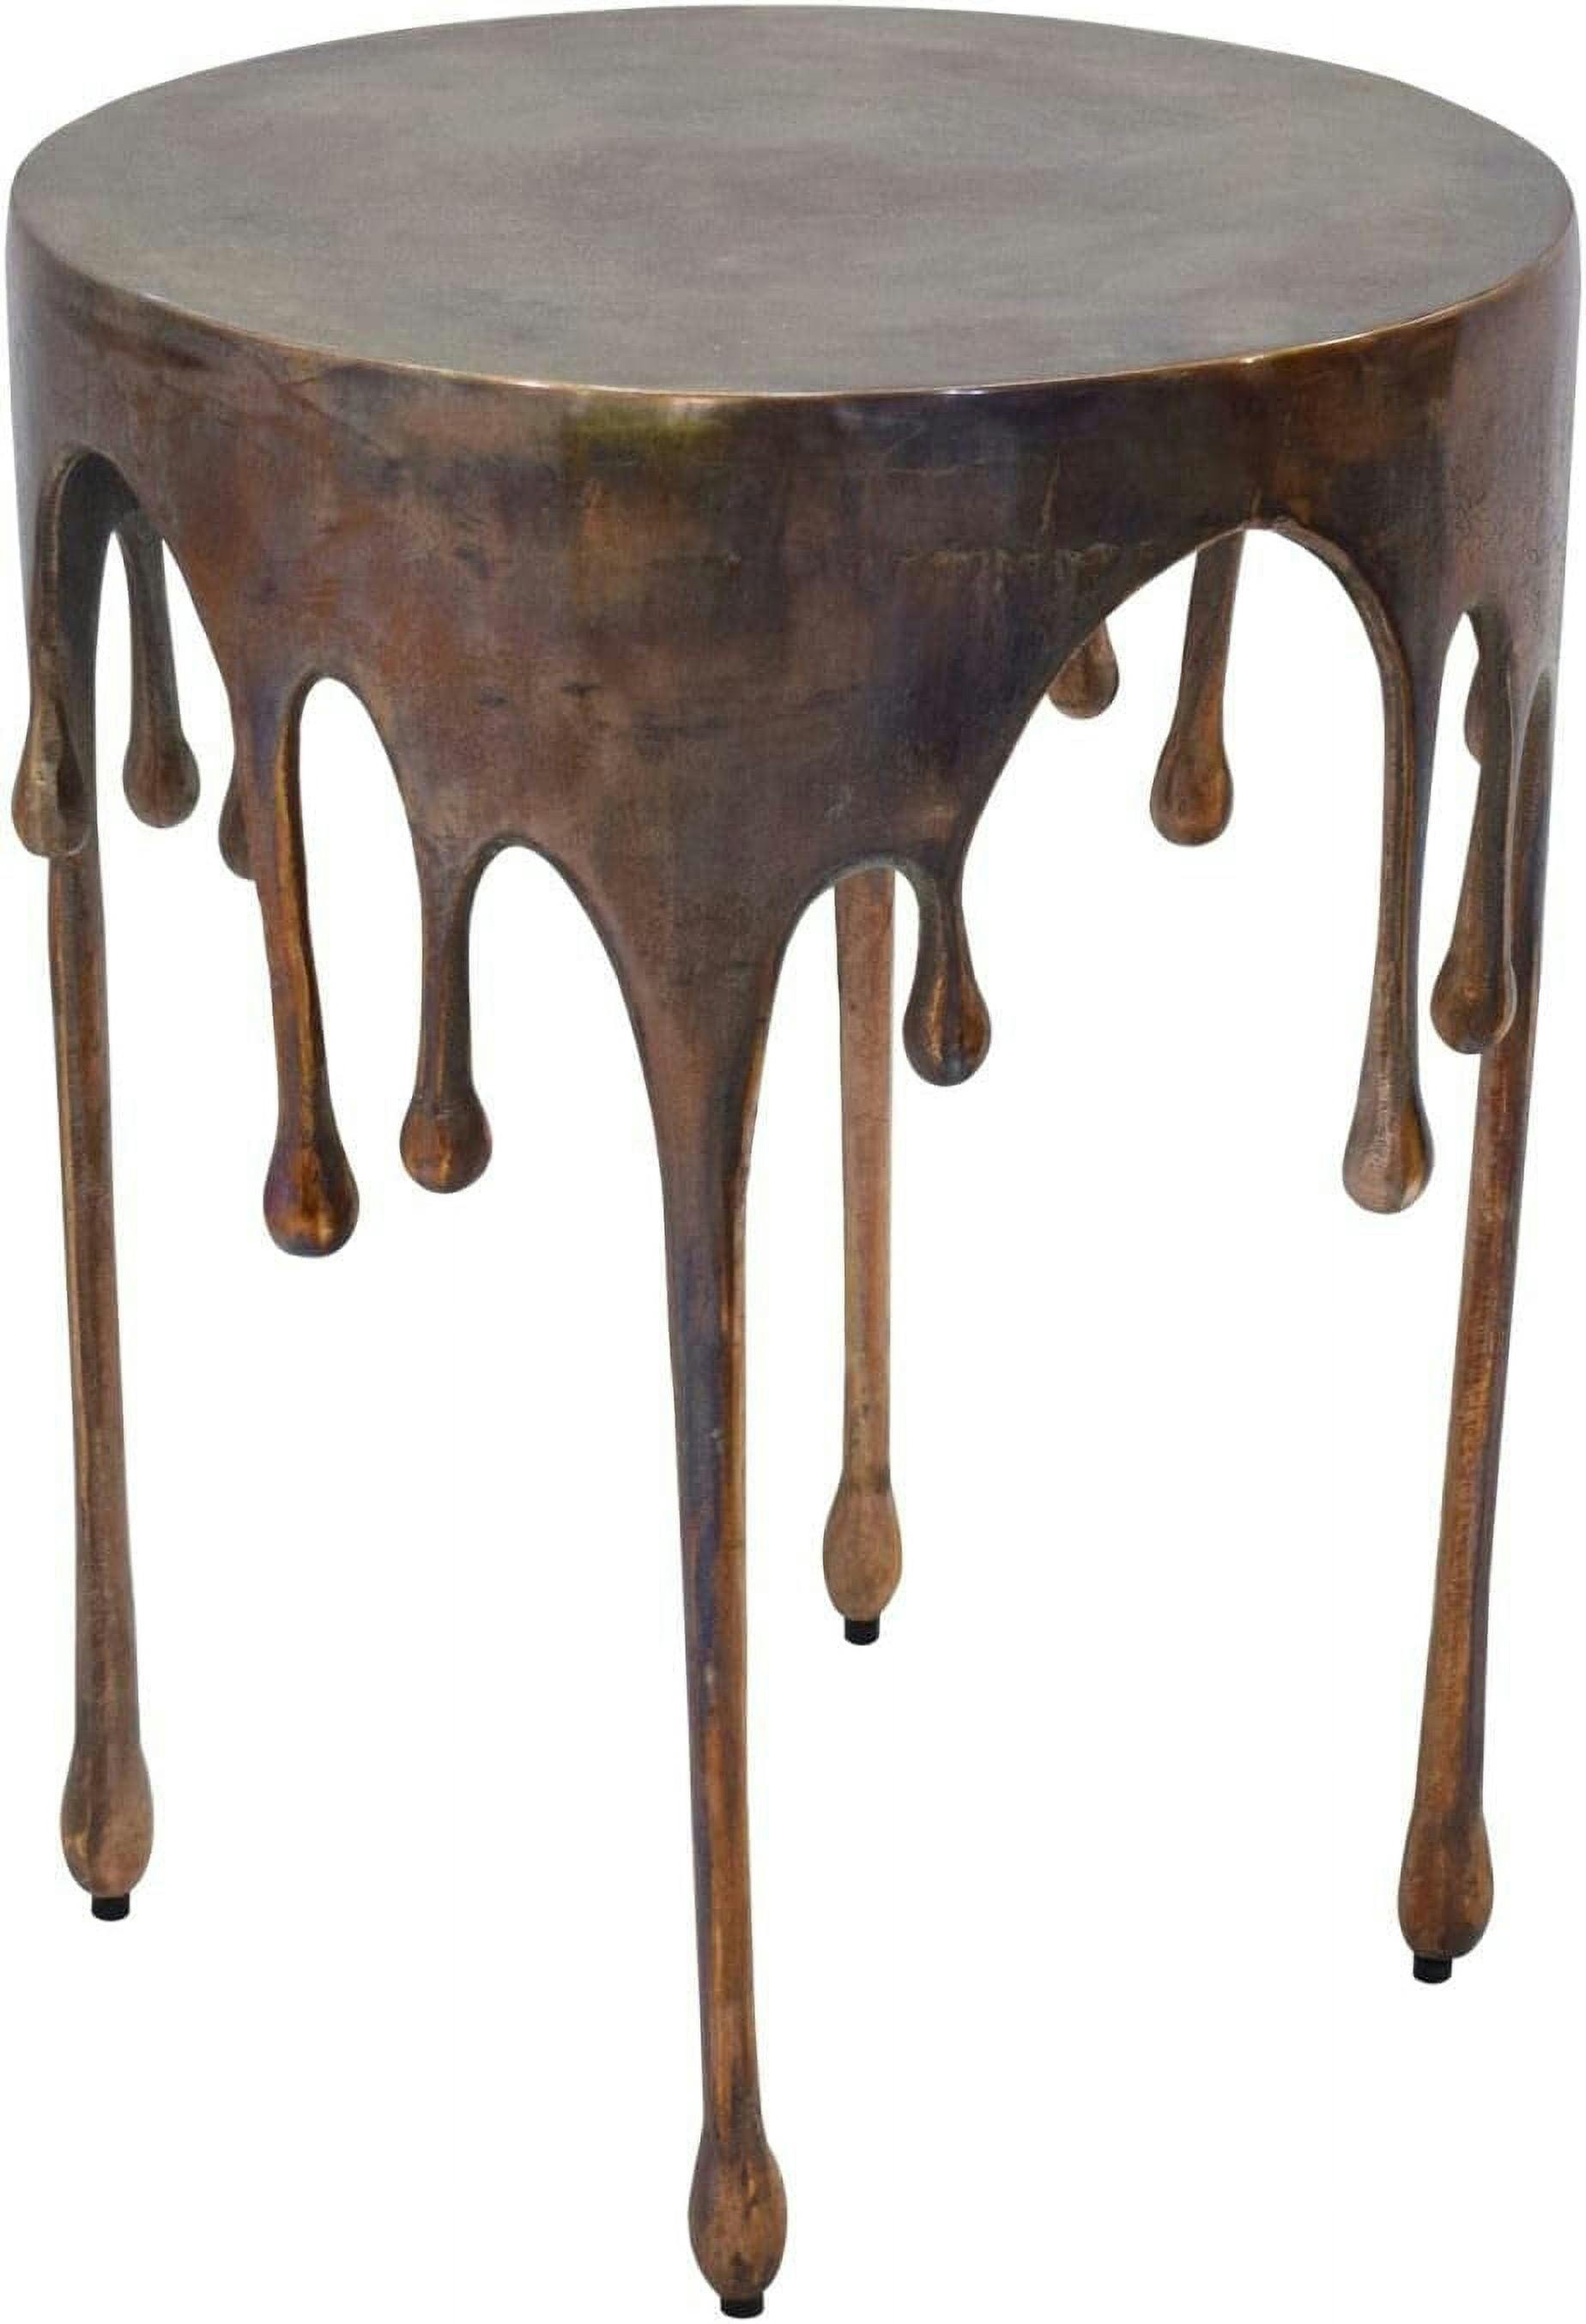 Modern Copper Drip 17" Round Metal Accent Table